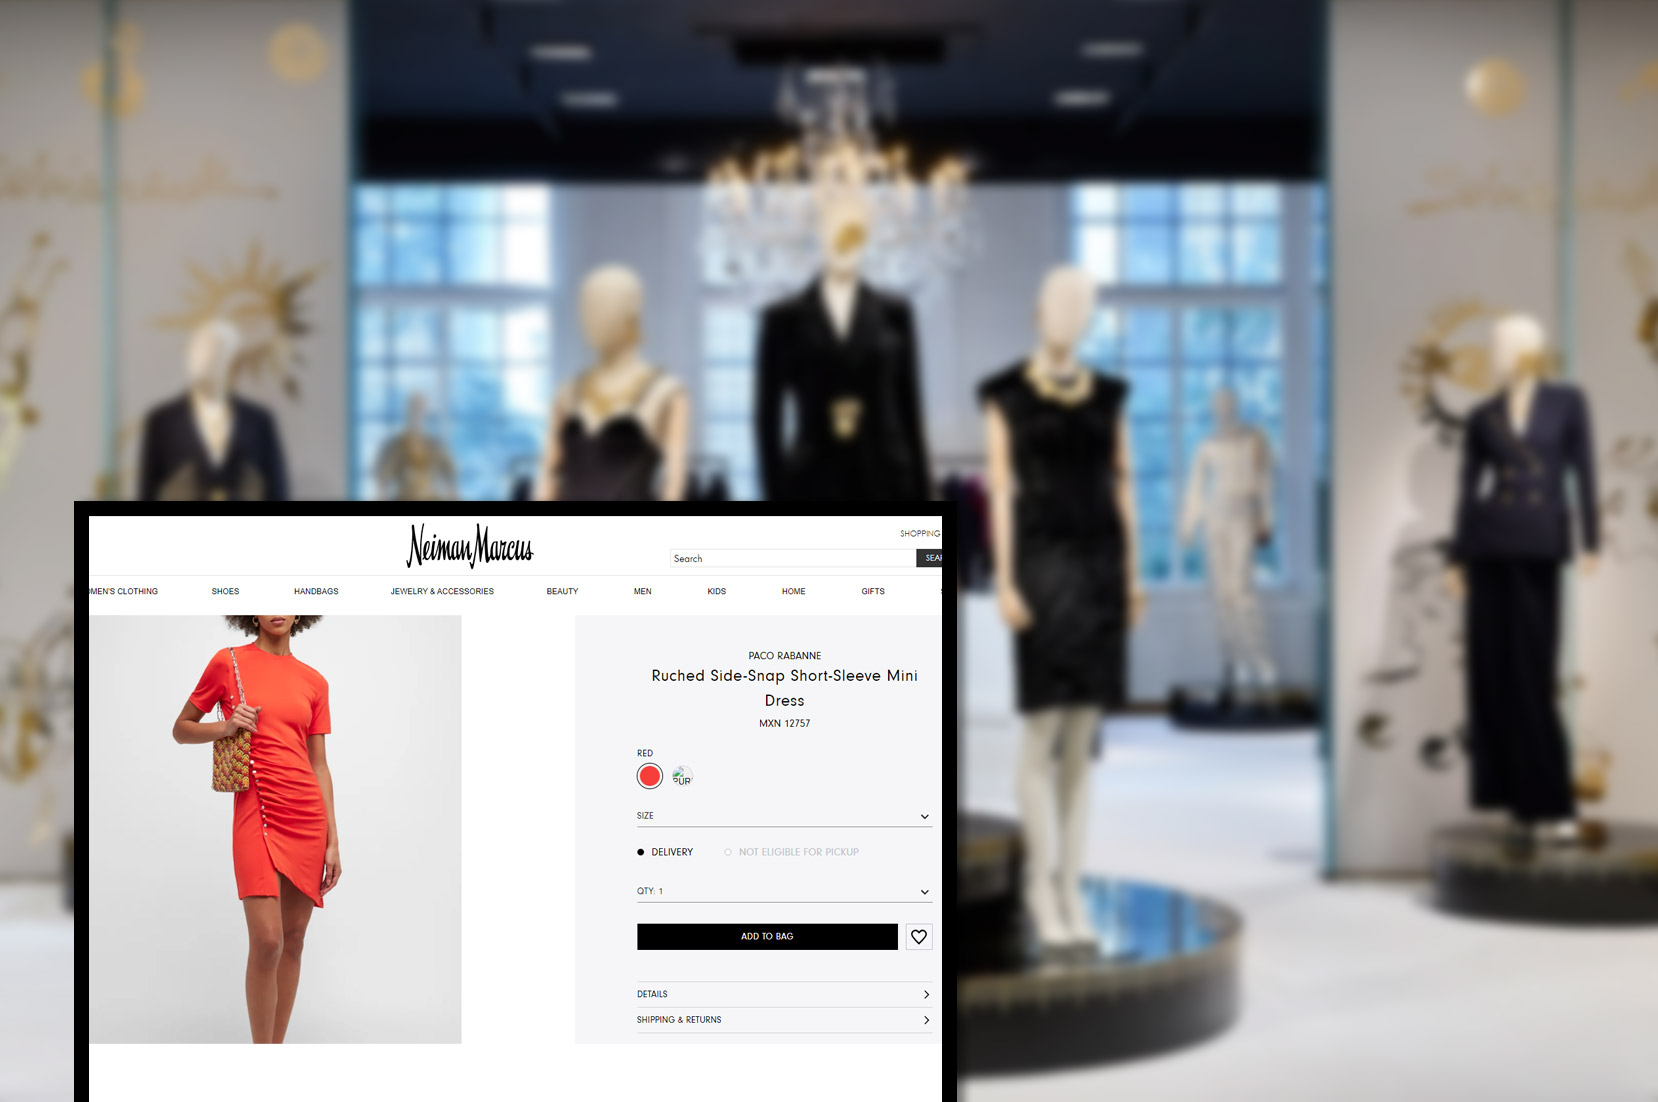 neimanmarcus-comproduct-pricing-information-and-image-scraping-services